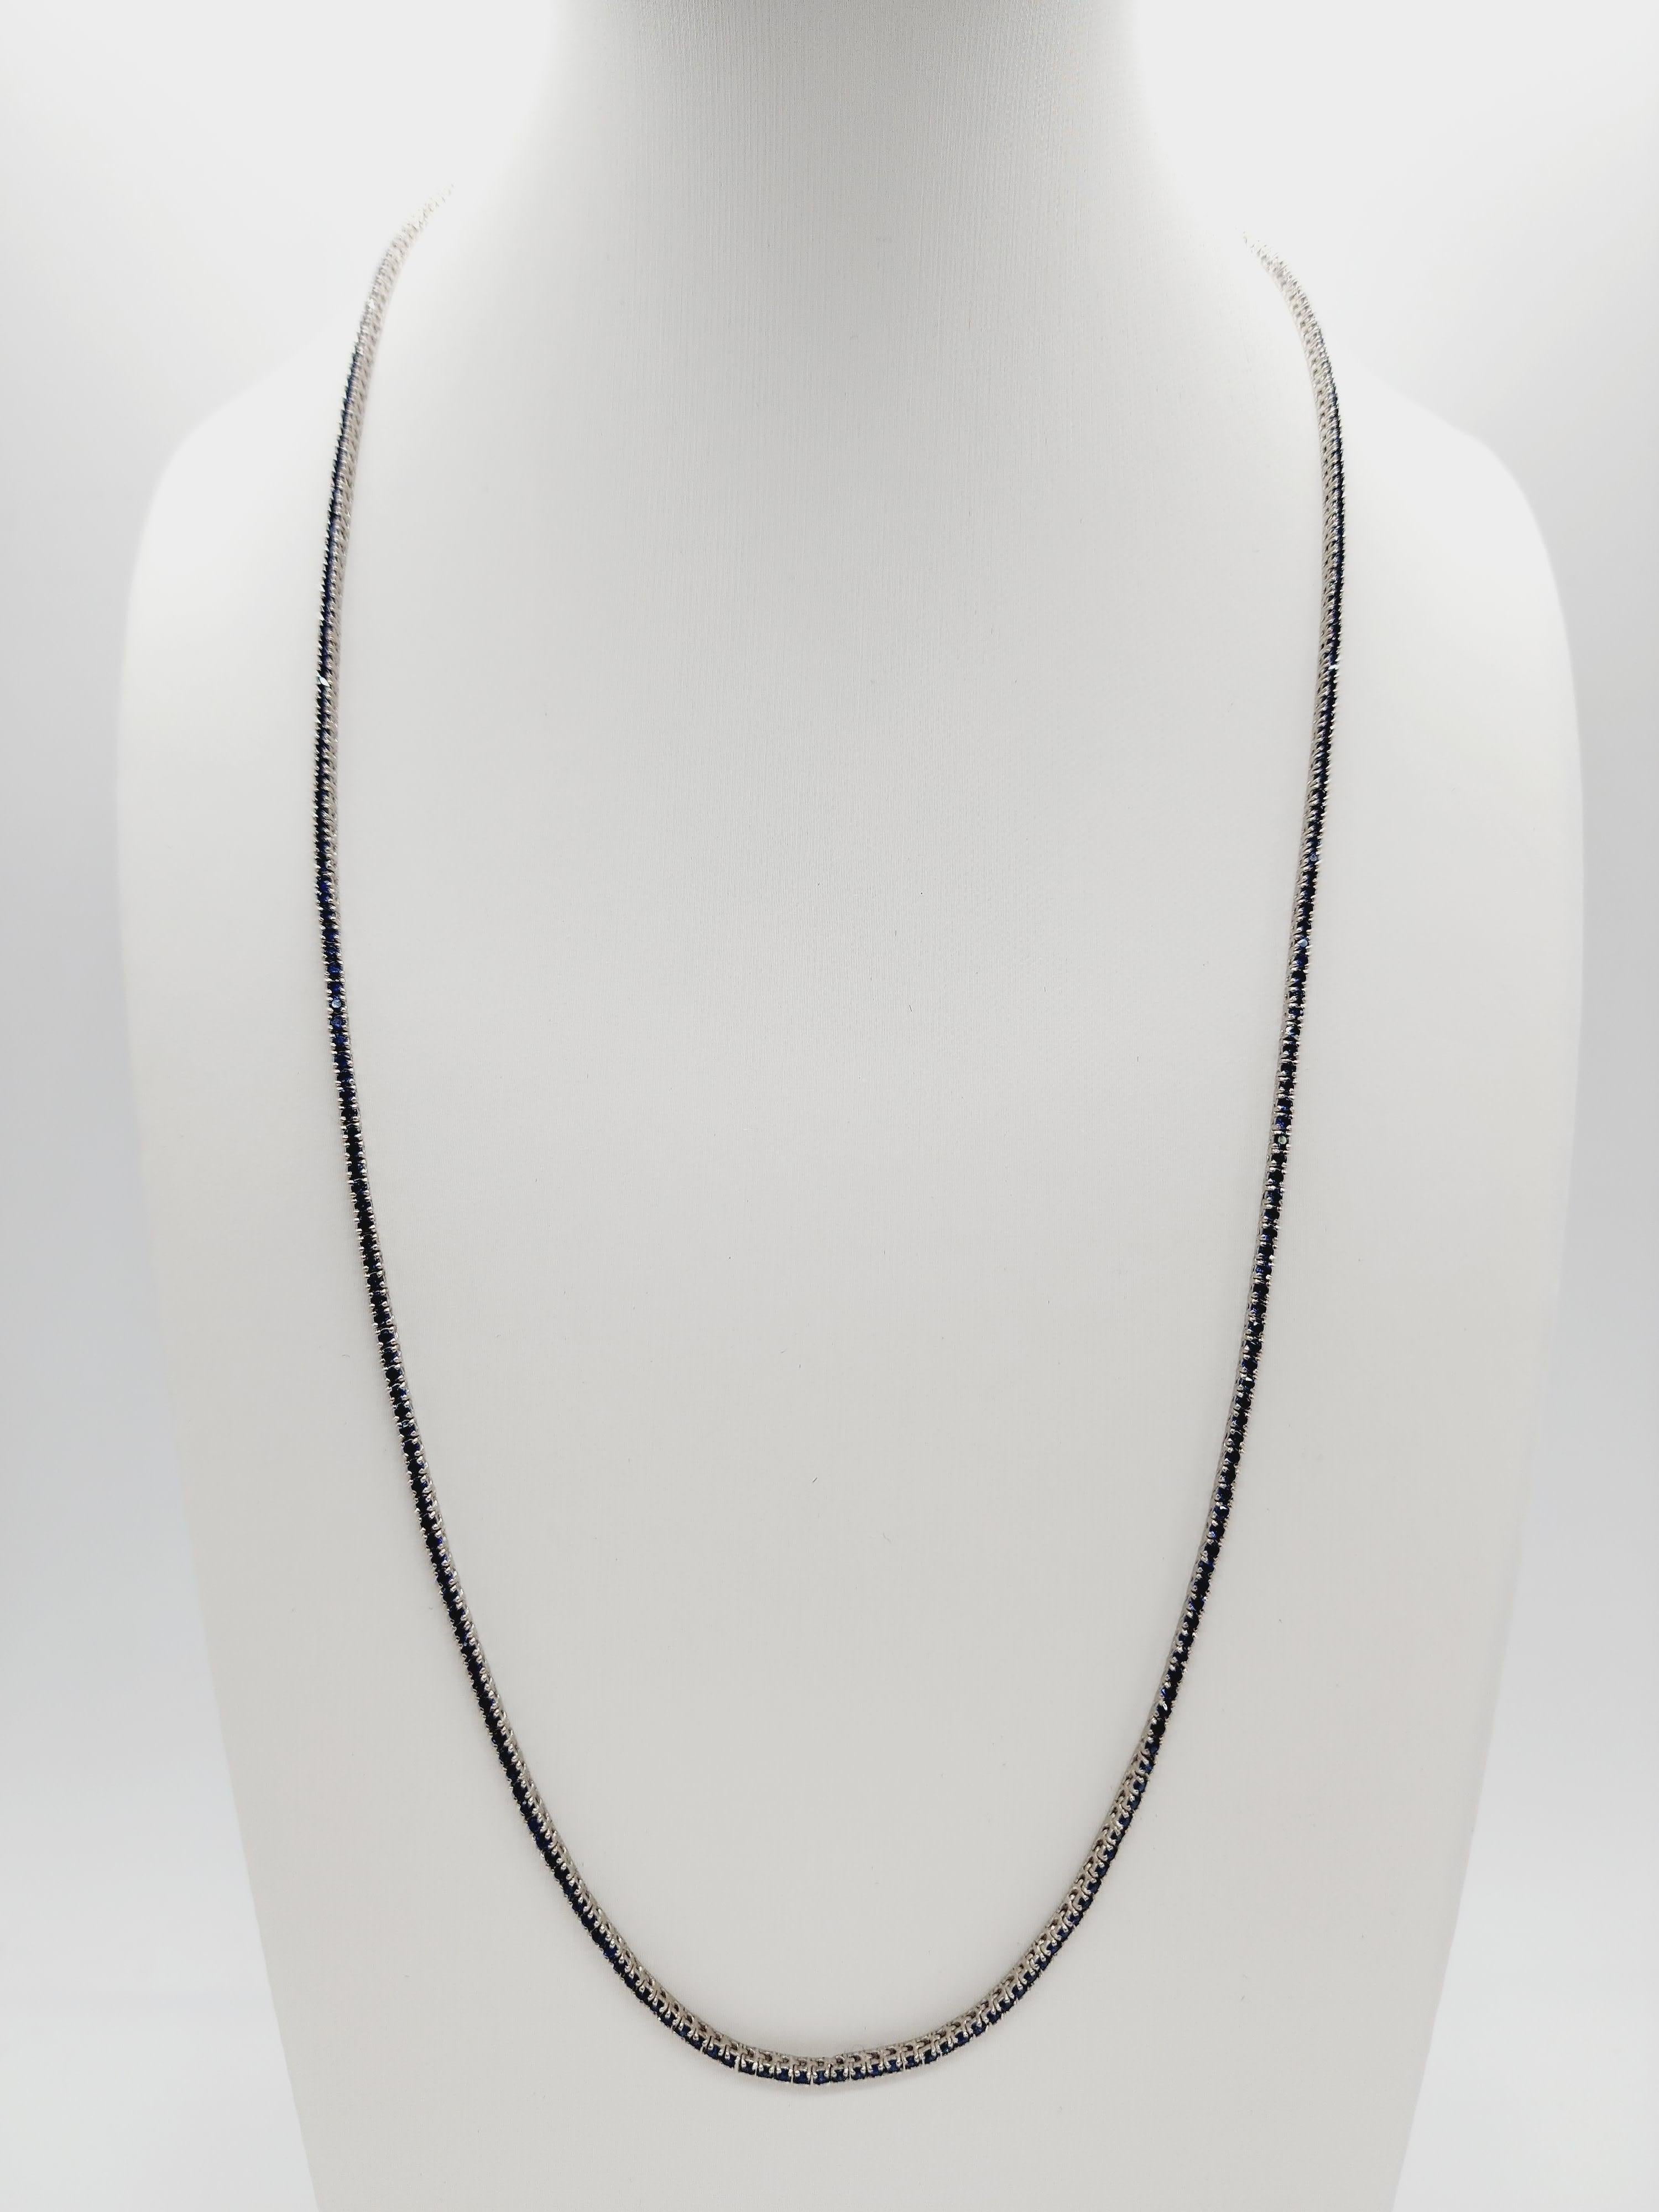 SAPPHIRE TENNIS NECKLACE WHITE GOLD 14K, 
18 INCH, 1.5 MM WIDE.

All sapphire are natural, not treated.